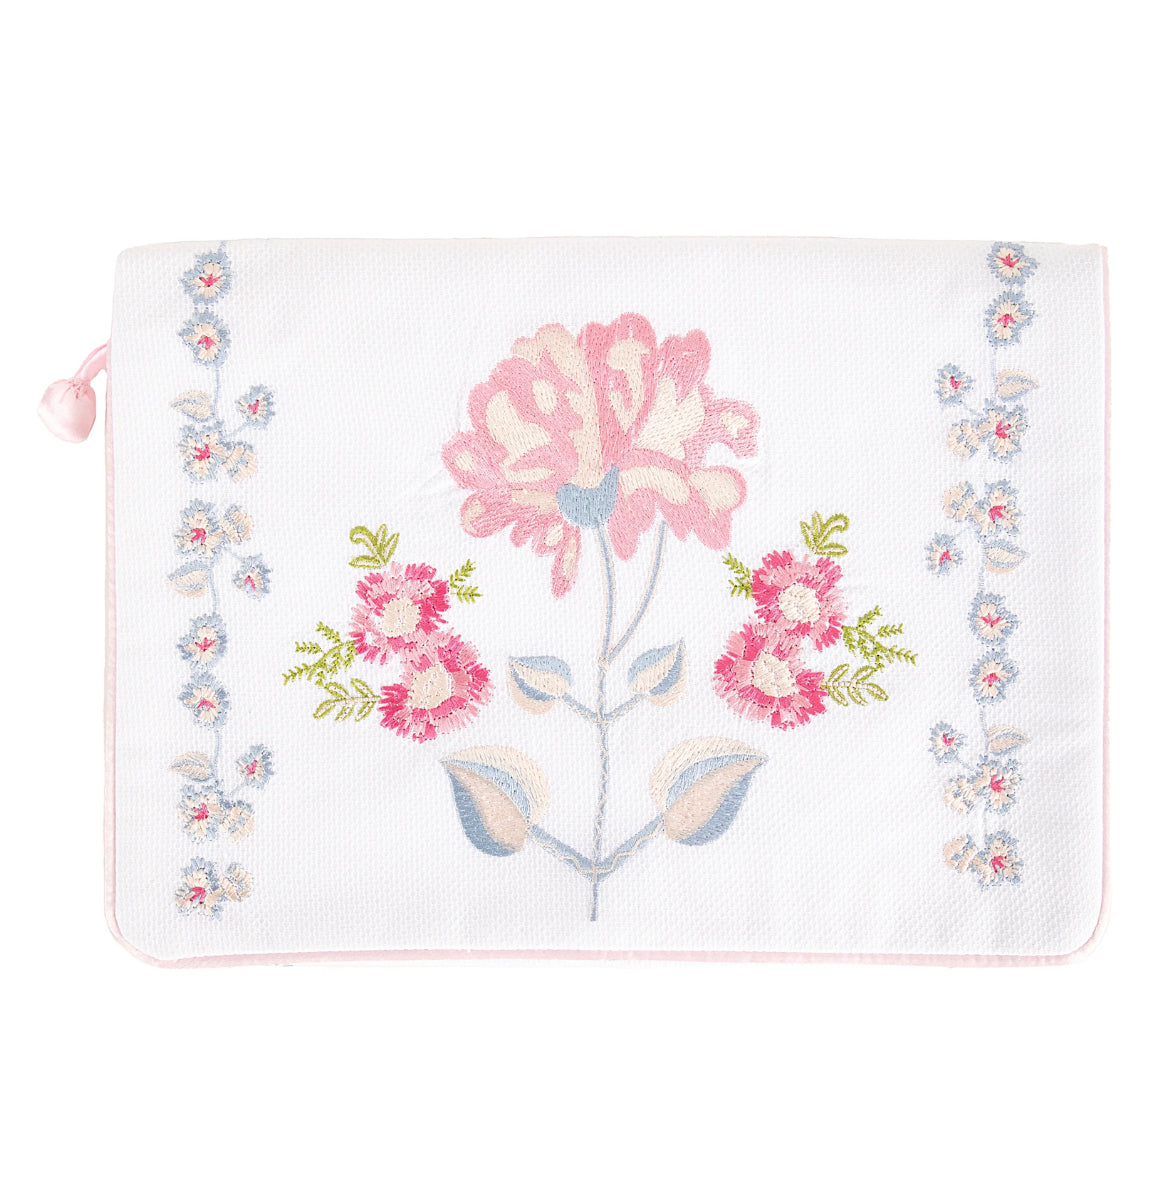 Embroidered Pique Lingerie Envelope with Pink Satin Trim